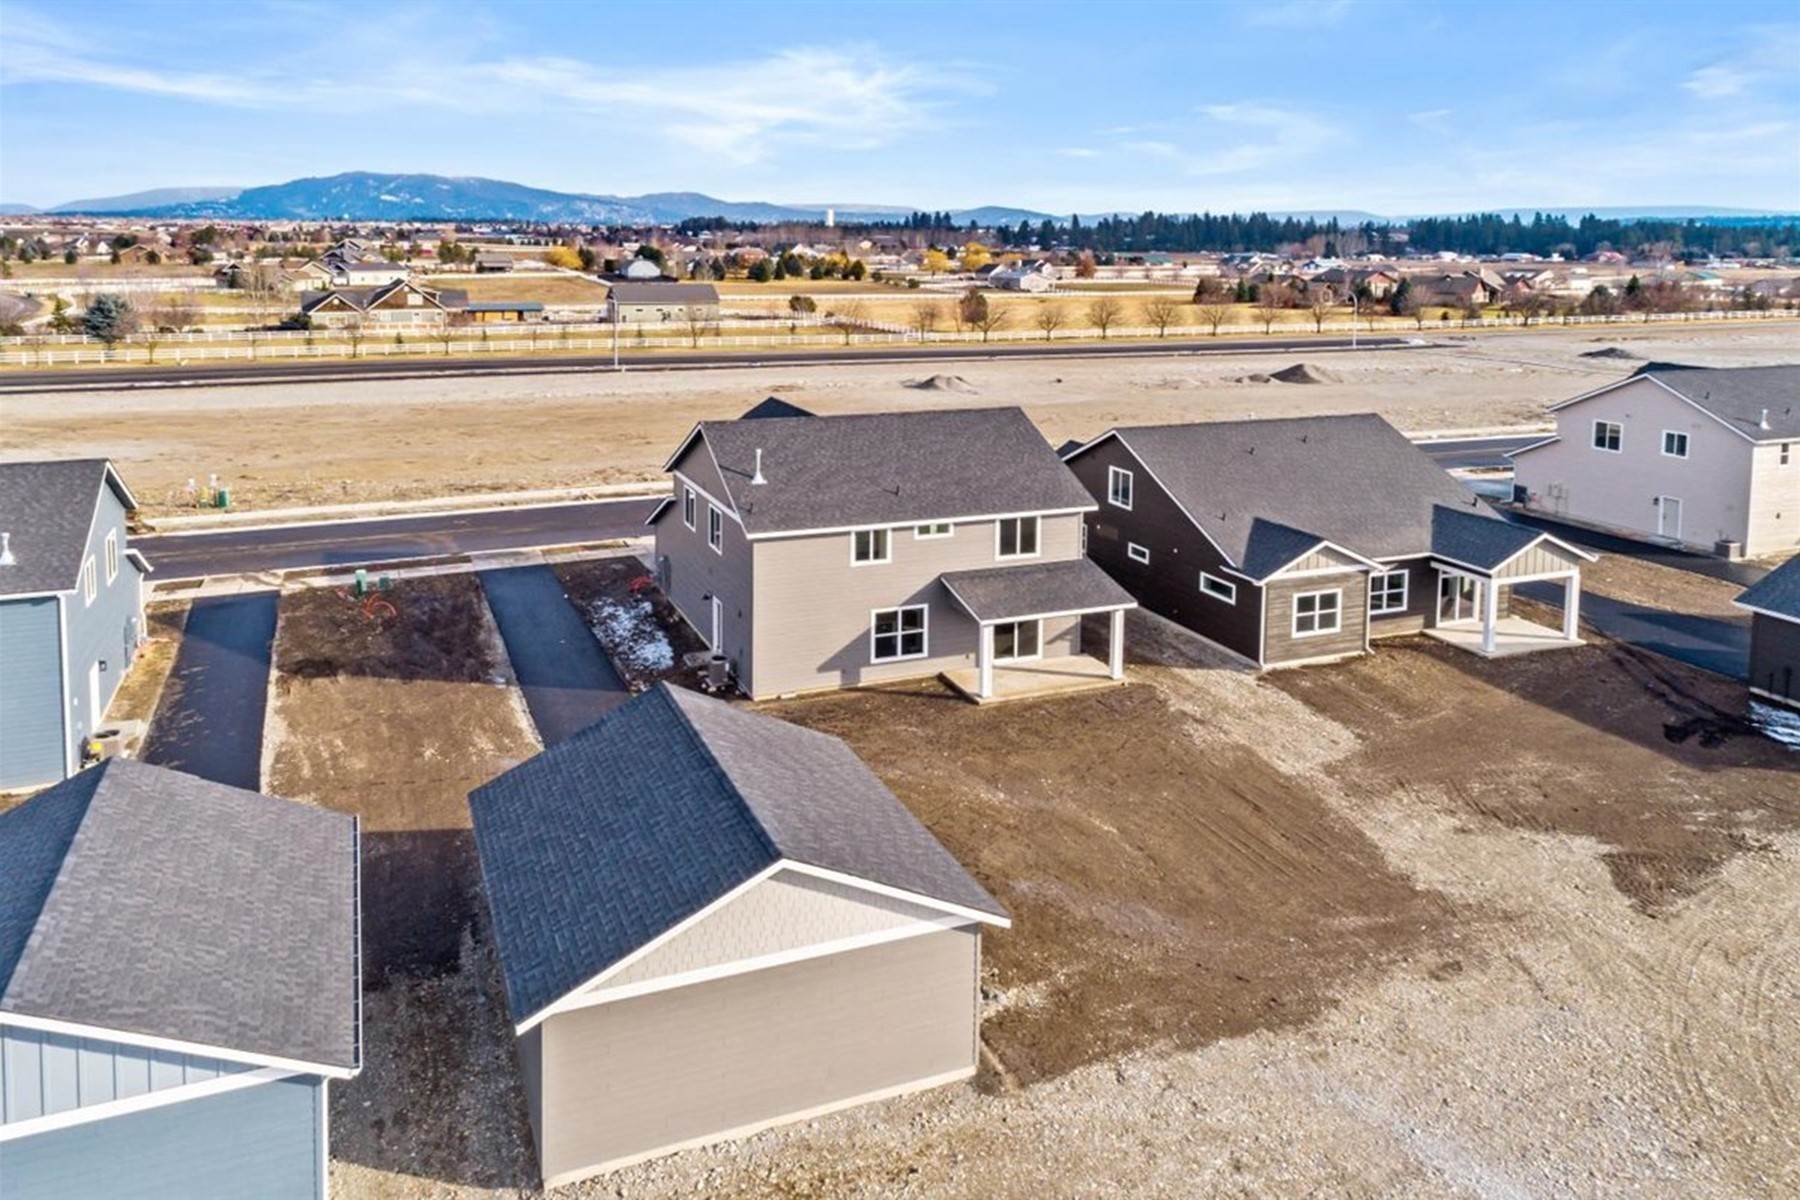 41. Single Family Homes for Sale at Parkllyn Estates 3151 N Cassiopeia St Post Falls, Idaho 83854 United States